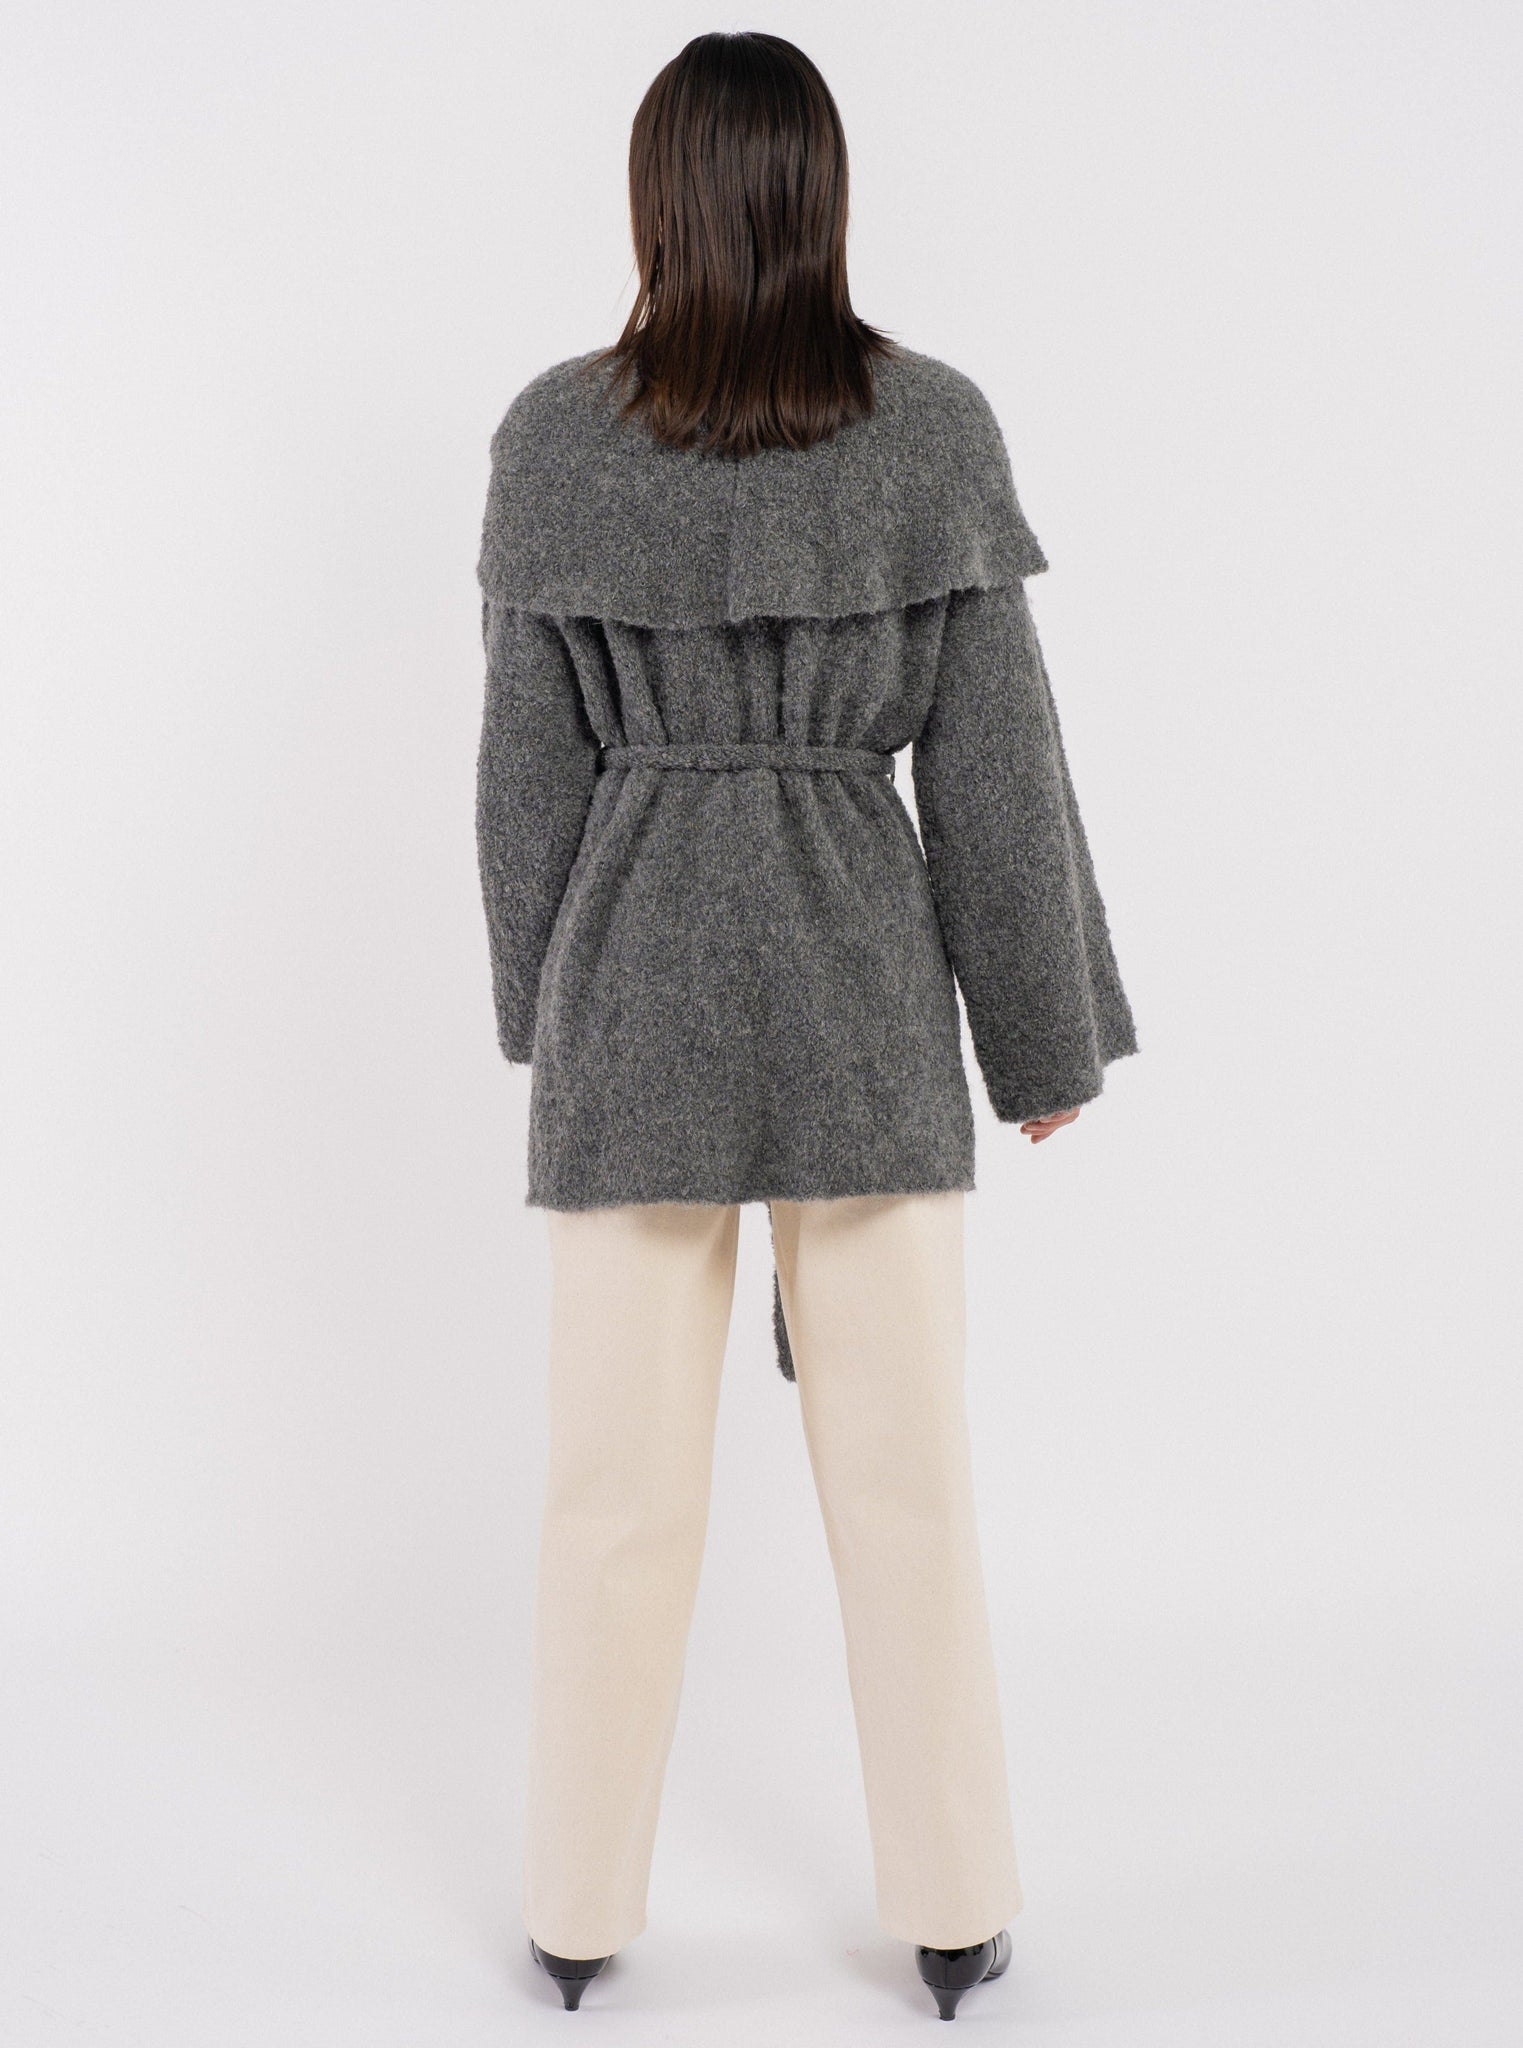 The back view of a woman wearing a Canyon Wrap Sweater Coat - Charcoal Grey and beige pants.